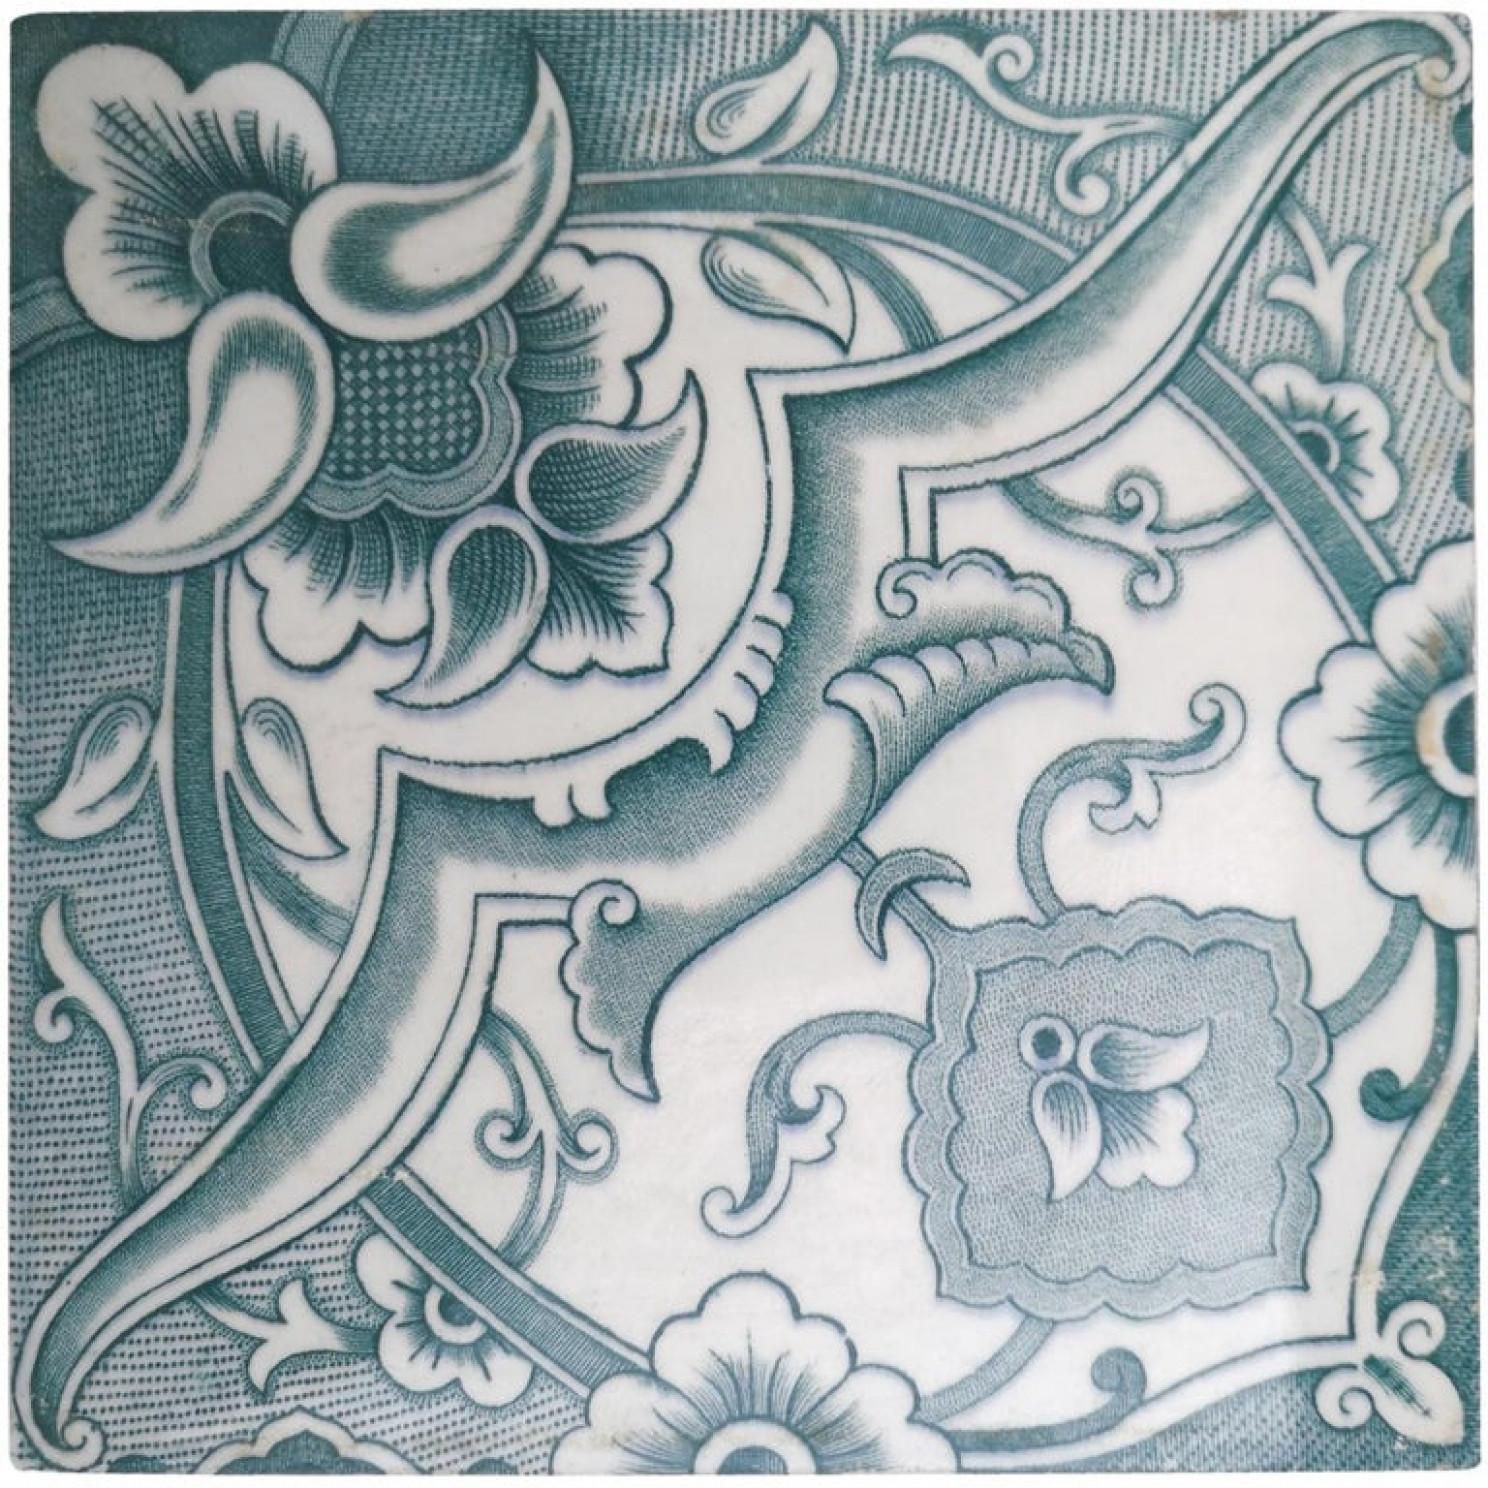 1 of the 150 glazed ceramic tiles tiles by Boch Freres, la Louvière, circa 1920's . Beautiful original antique dark green and off-white tiles with a wonderful rich pattern.

The dimensions per tile are: 5.9 inch (15.2 cm) width x 5.9 inch (15.2 cm)